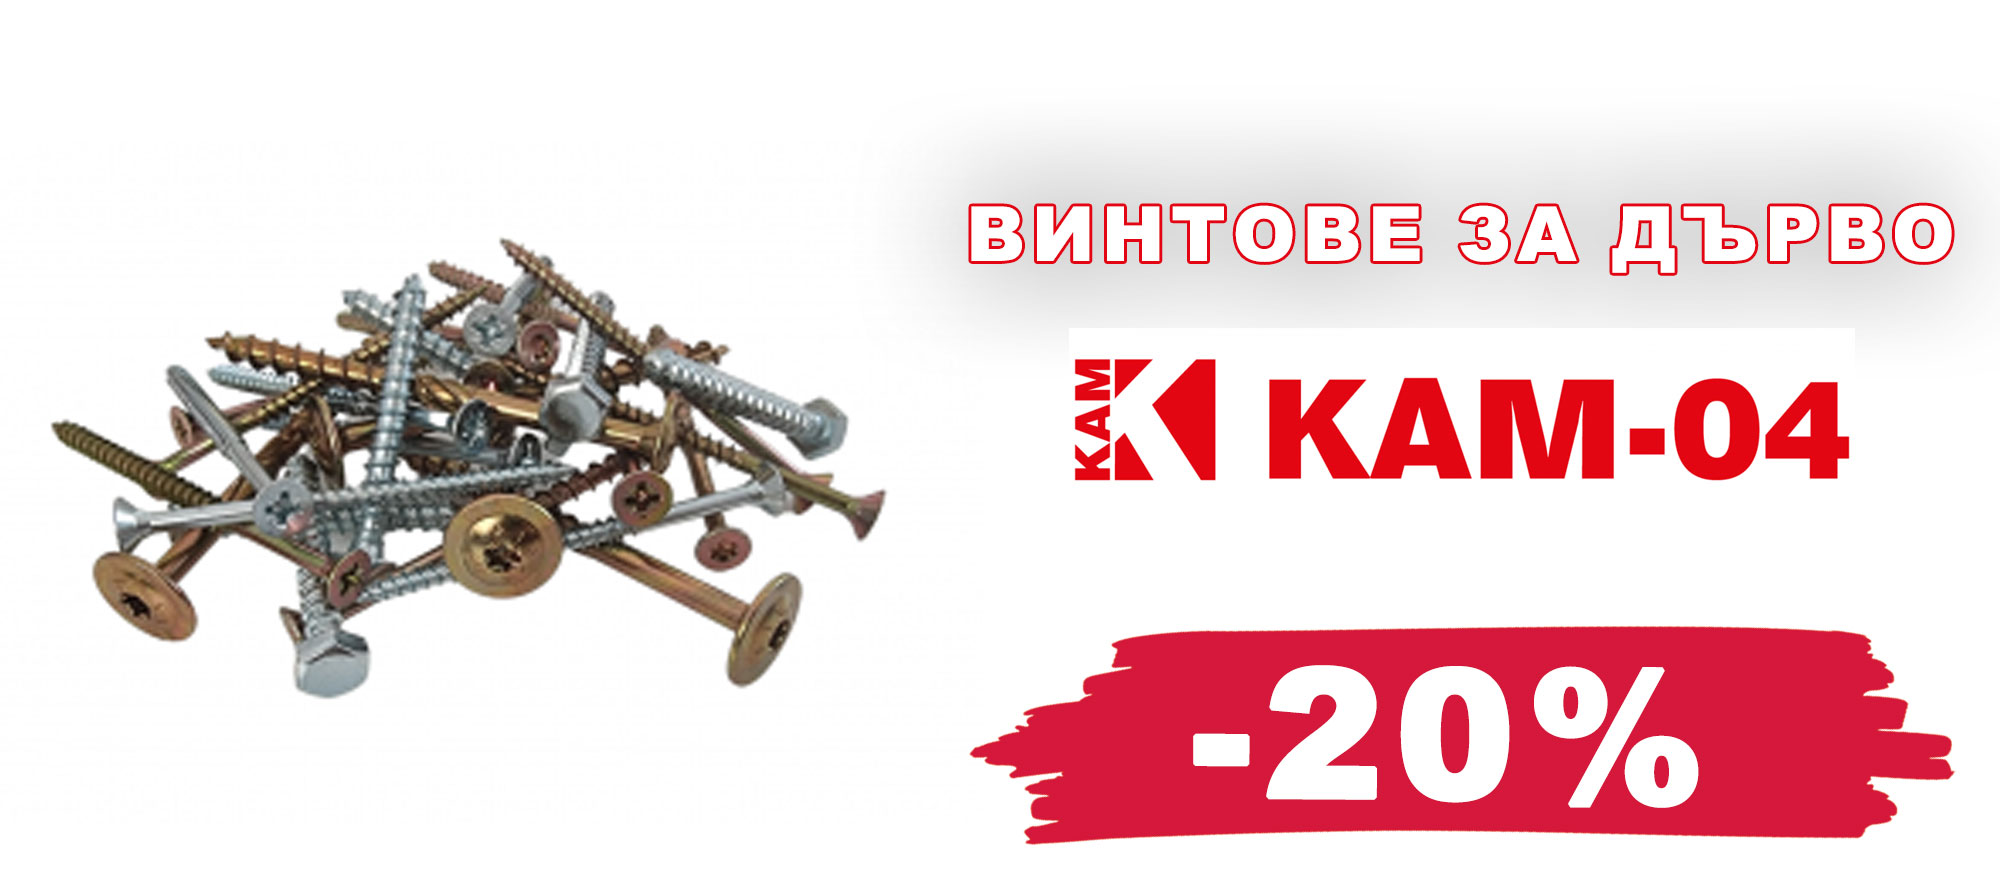 Wood screws from KAM 04 with a 20% discount